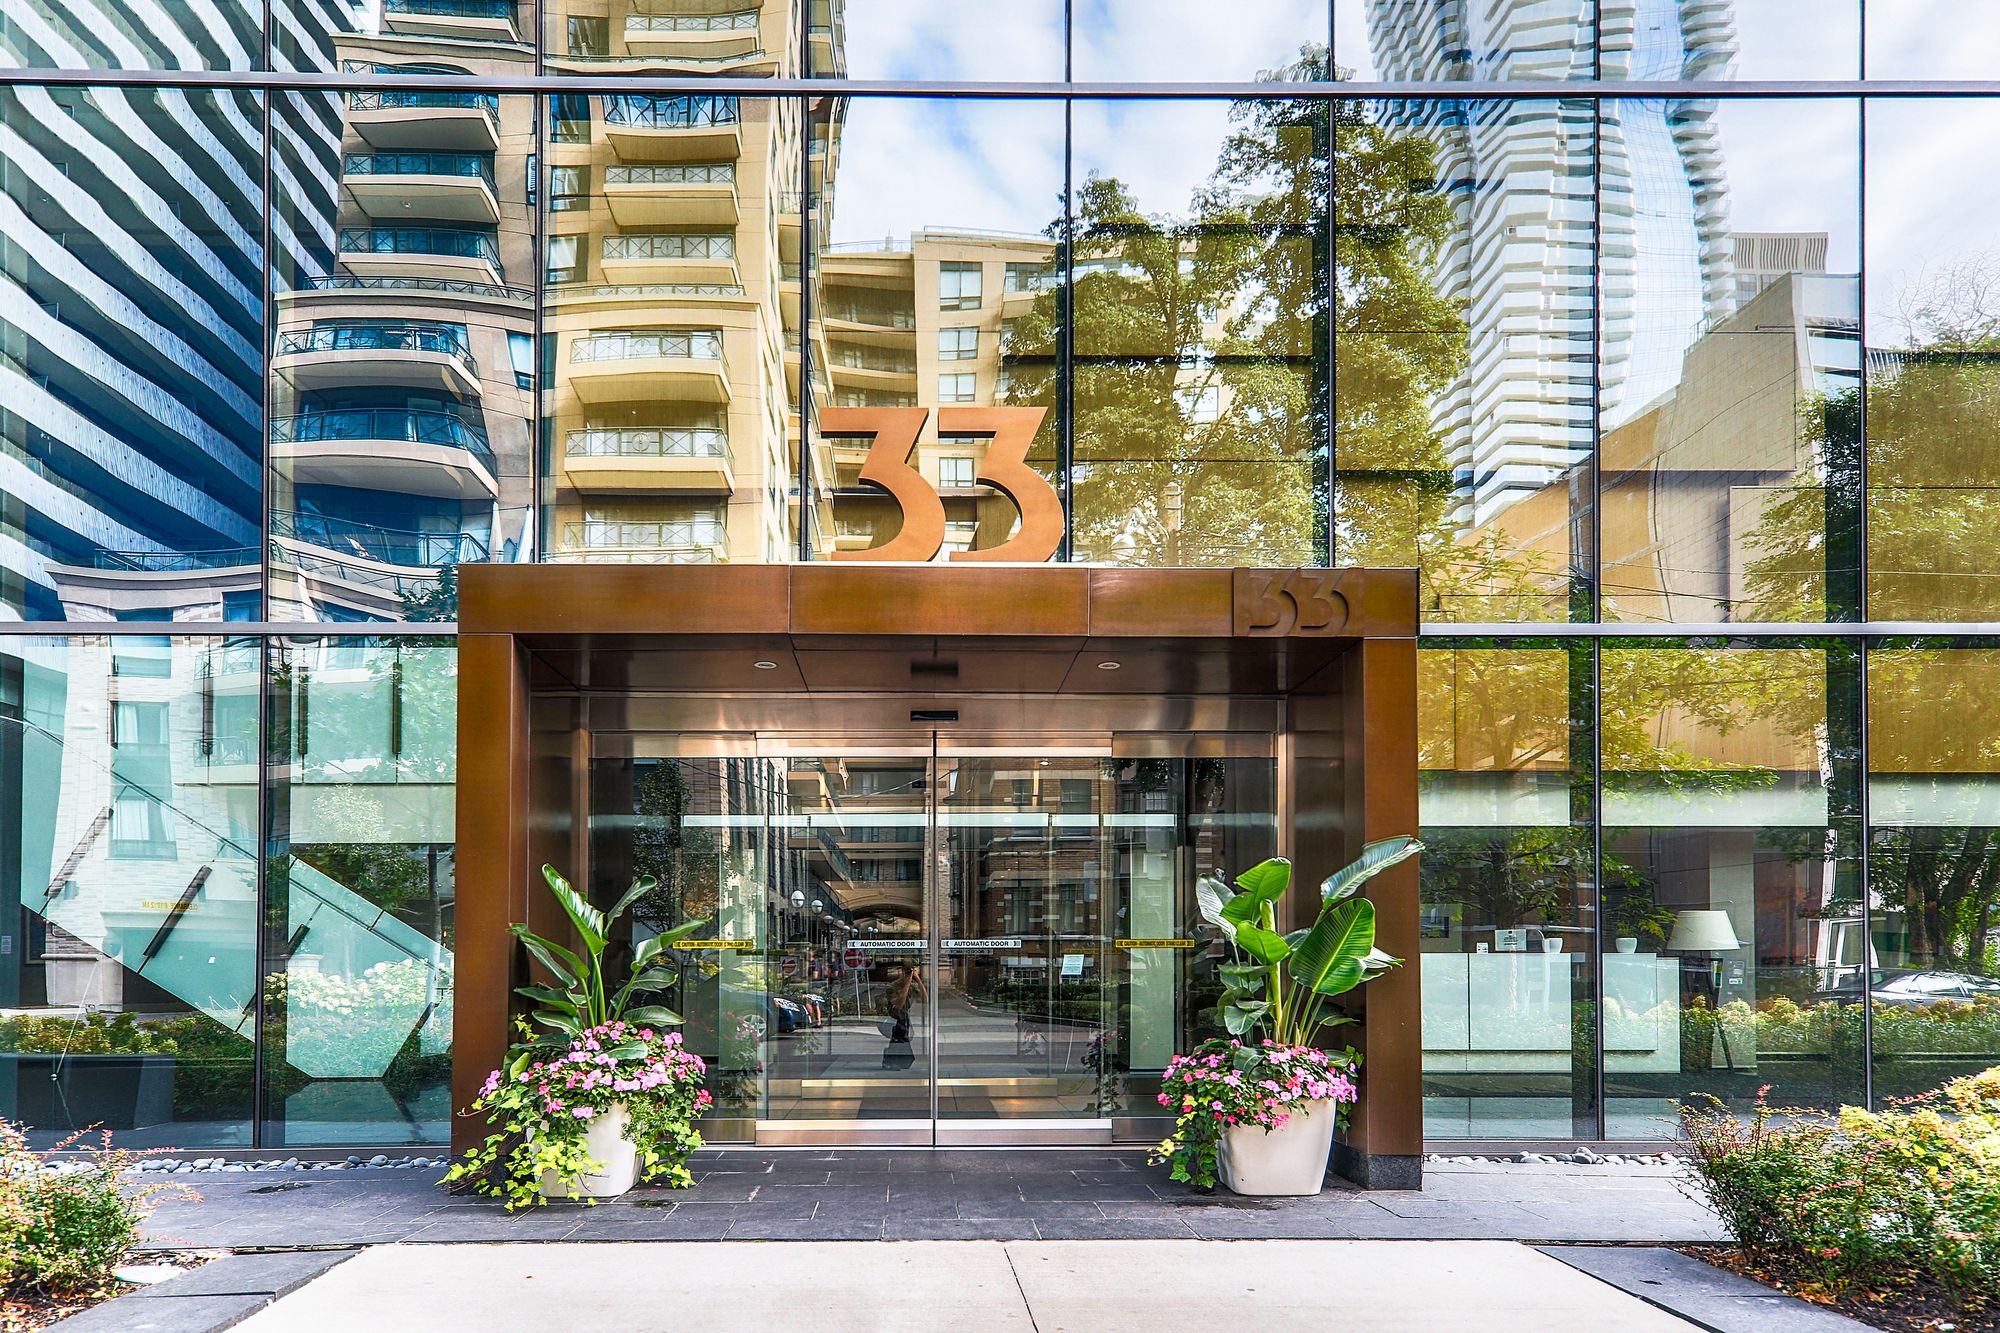 33 Charles St E. This condo at Casa is located in  Downtown, Toronto - image #5 of 6 by Strata.ca